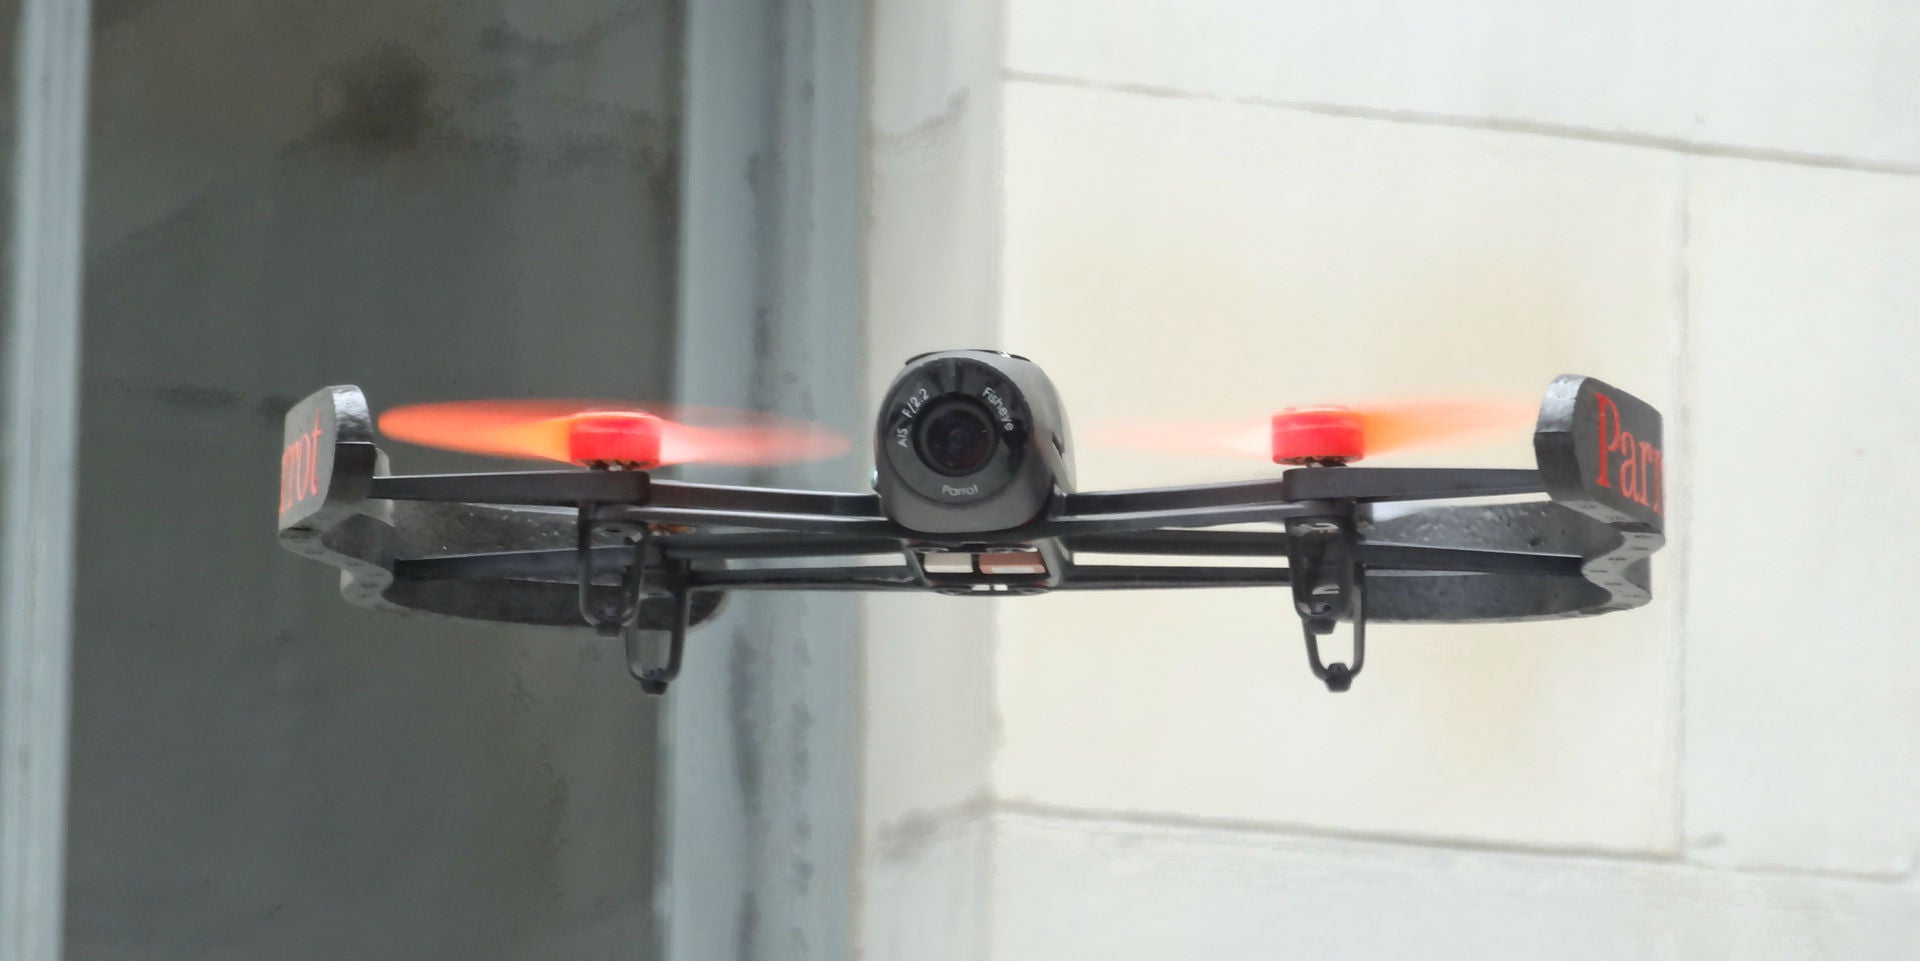 Parrot's New Bebop Drone Wants to Be Your Eyes in the Skies